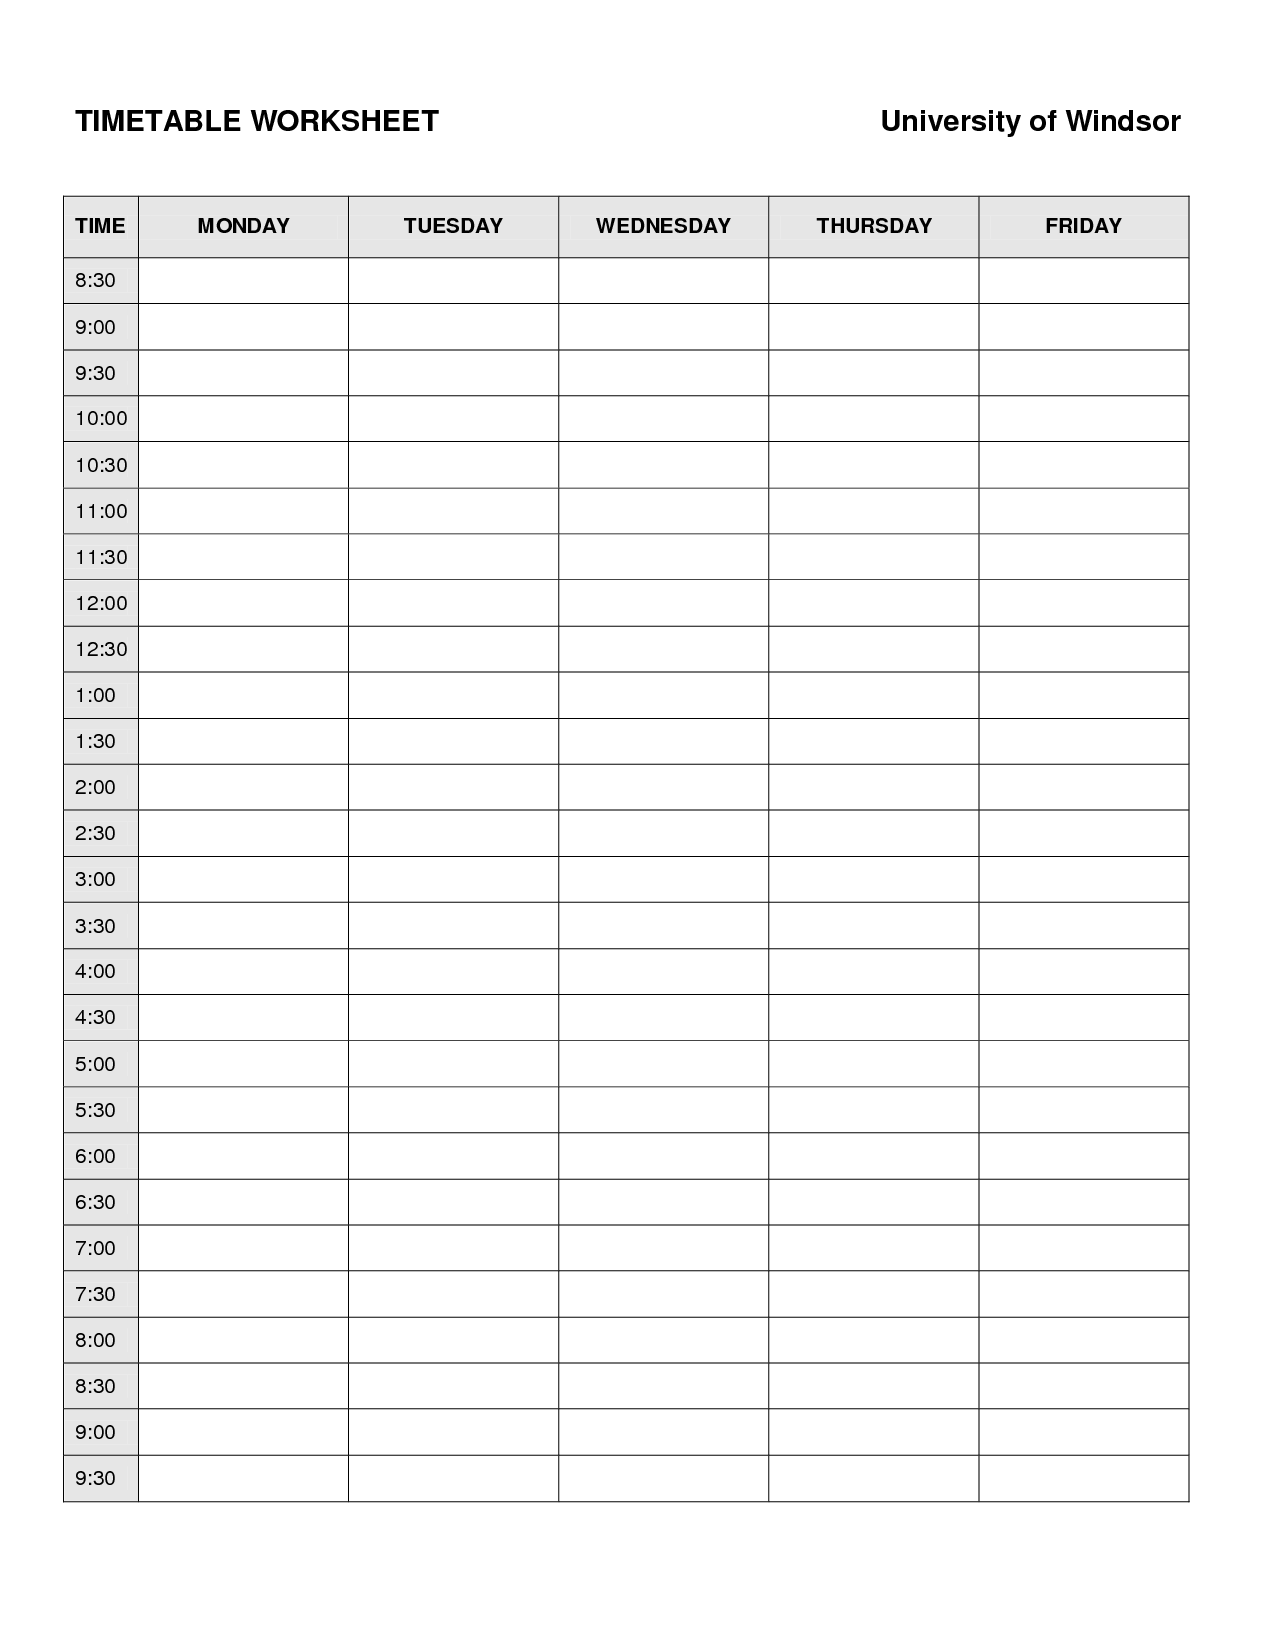 6-best-images-of-college-schedule-planner-worksheet-monday-friday